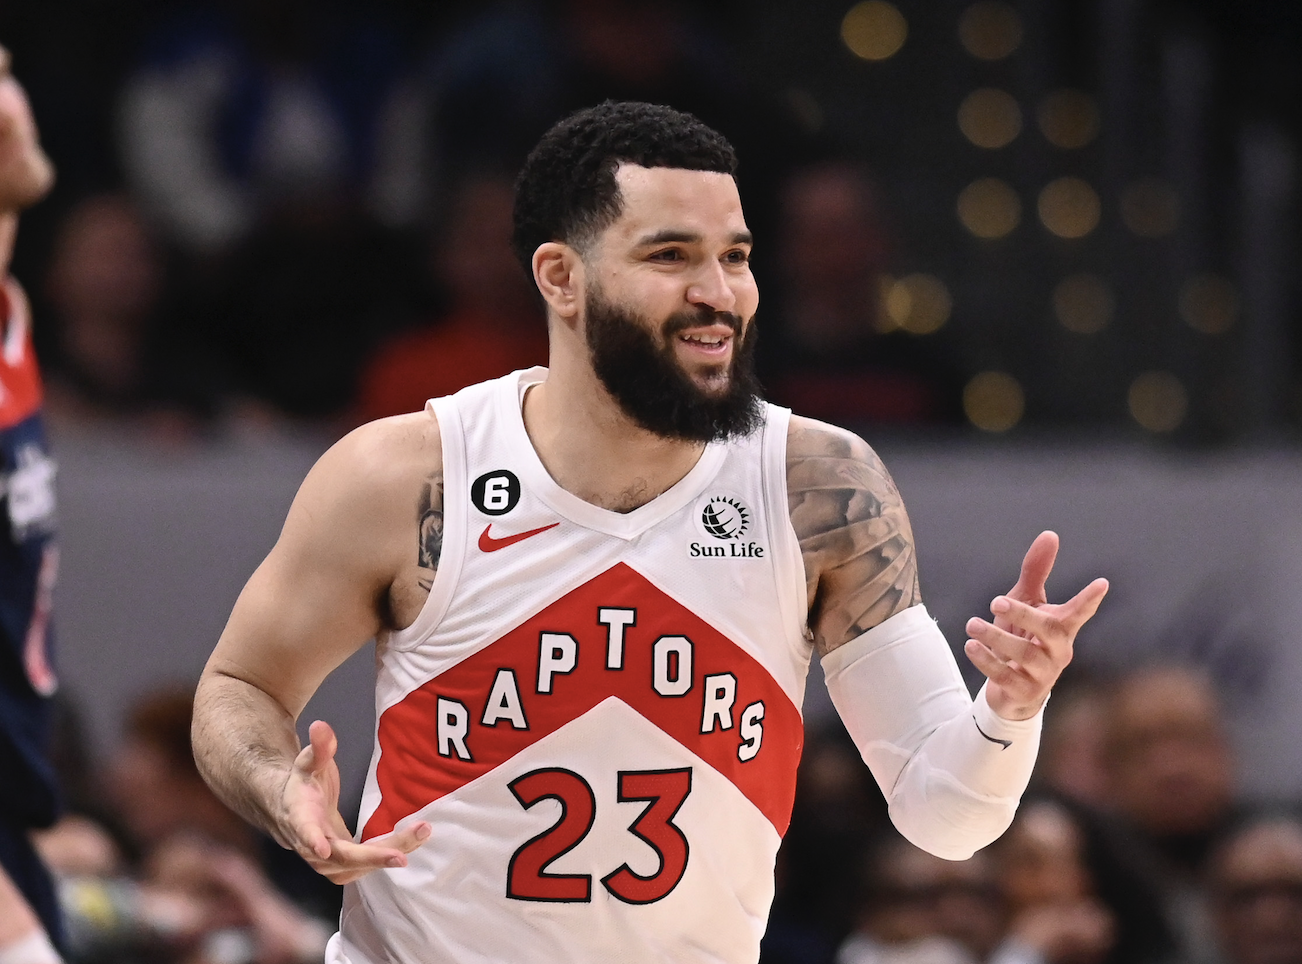 NBA Rumors: James Harden can be replaced by Fred VanVleet for 76ers